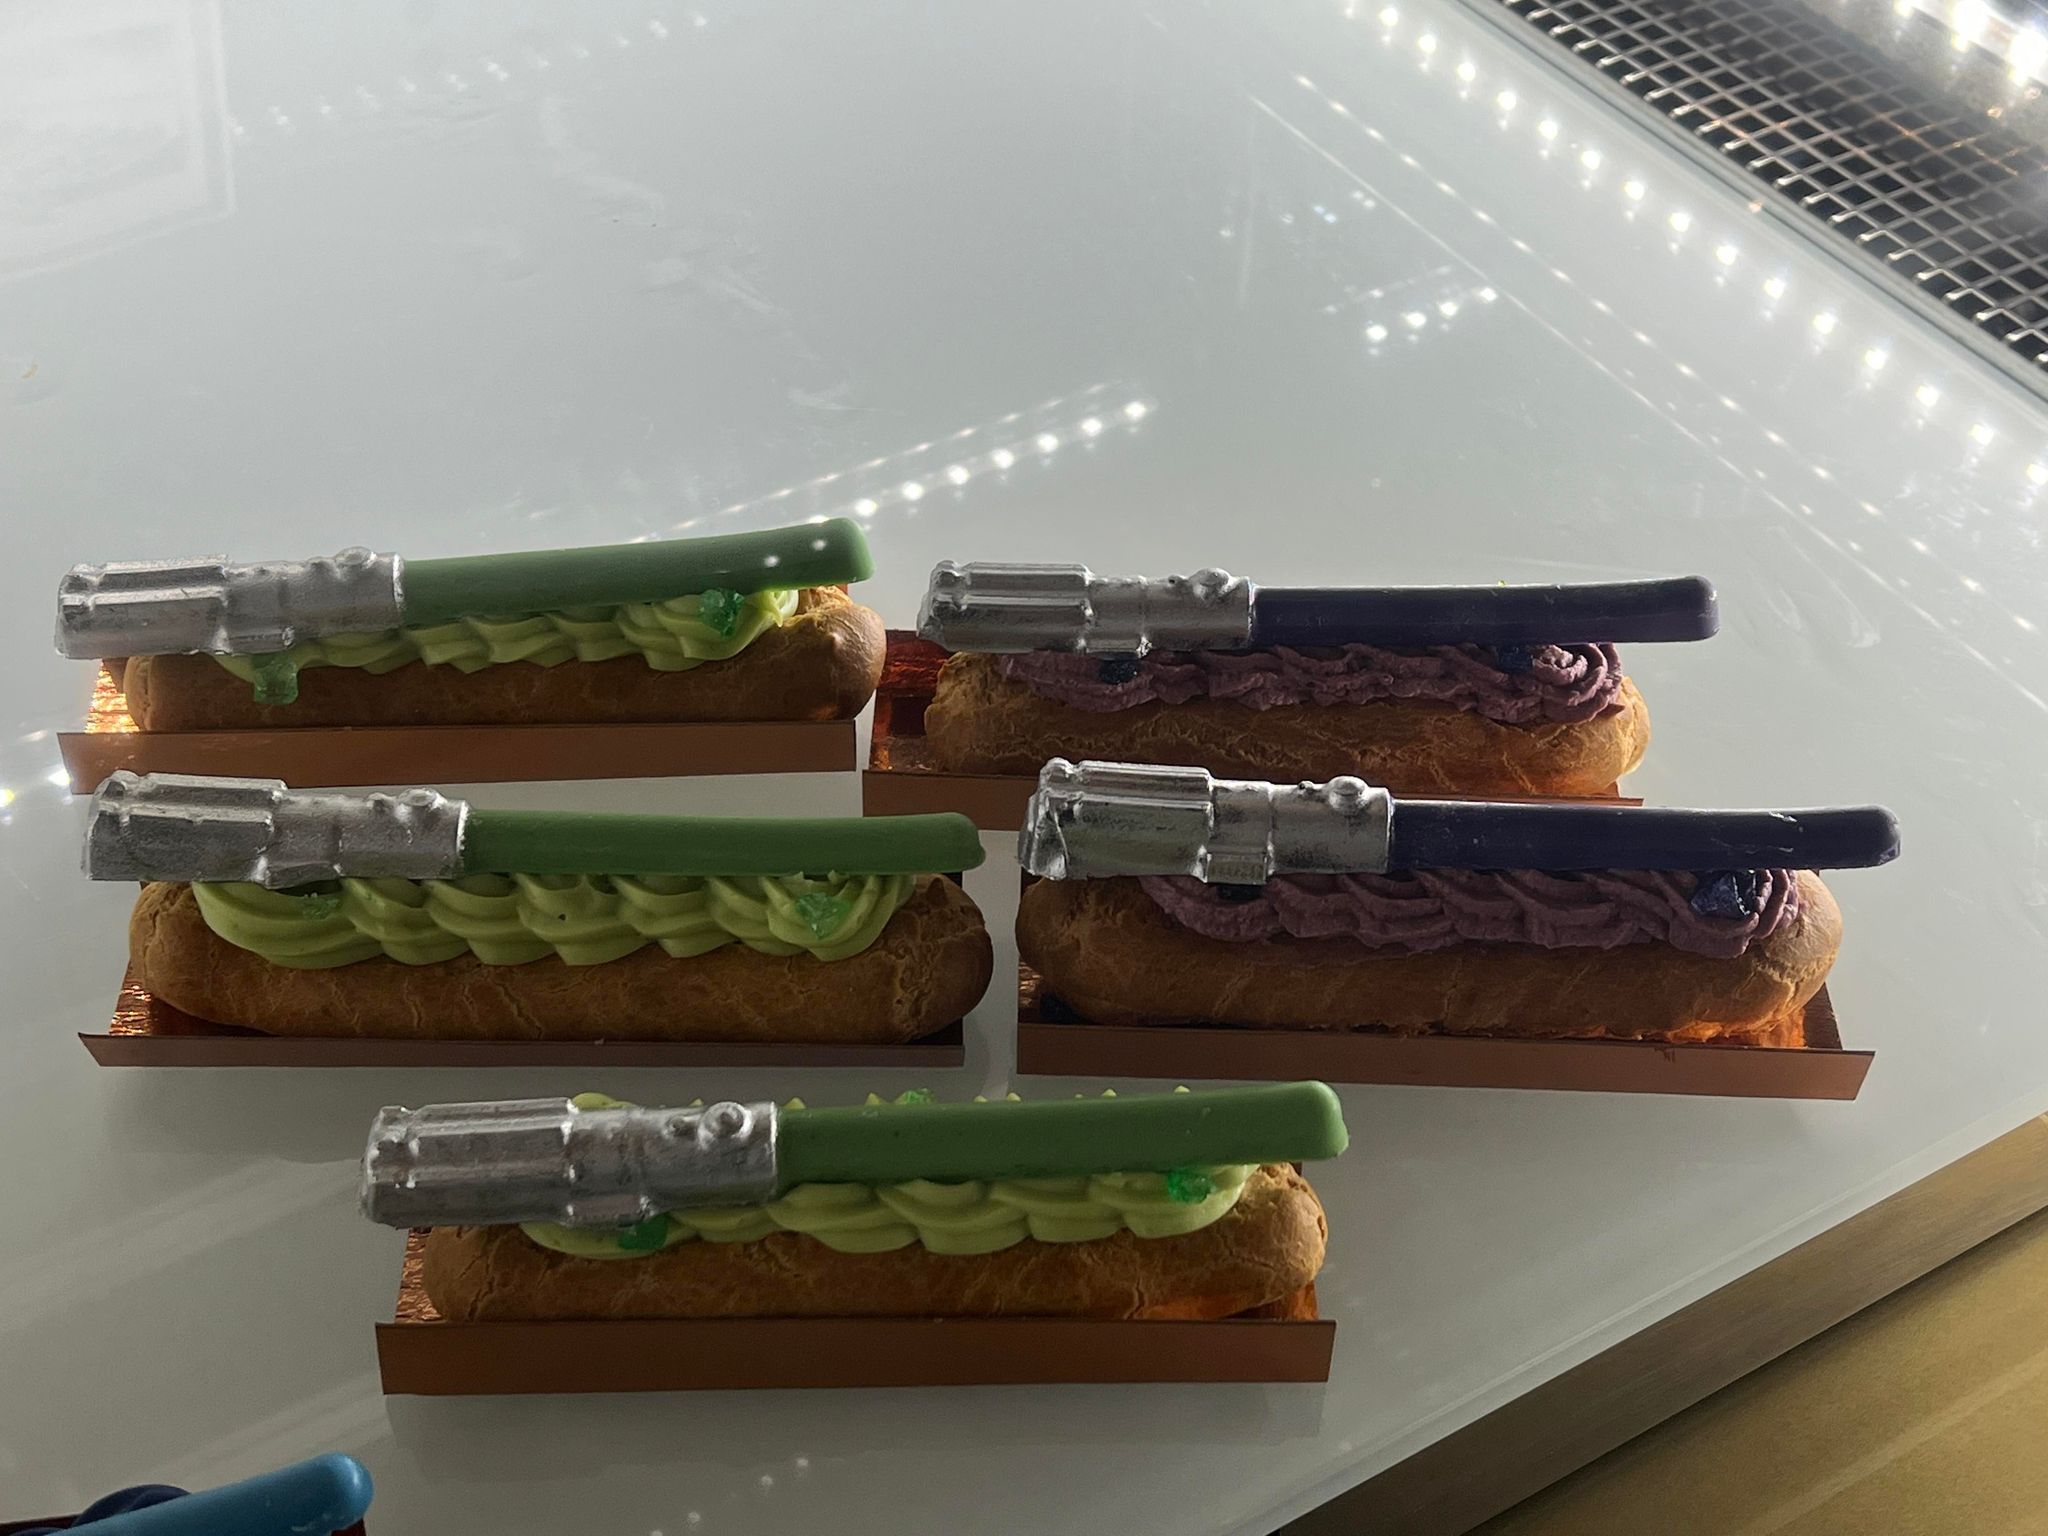 amorettes may 4 lightsaber eclairs